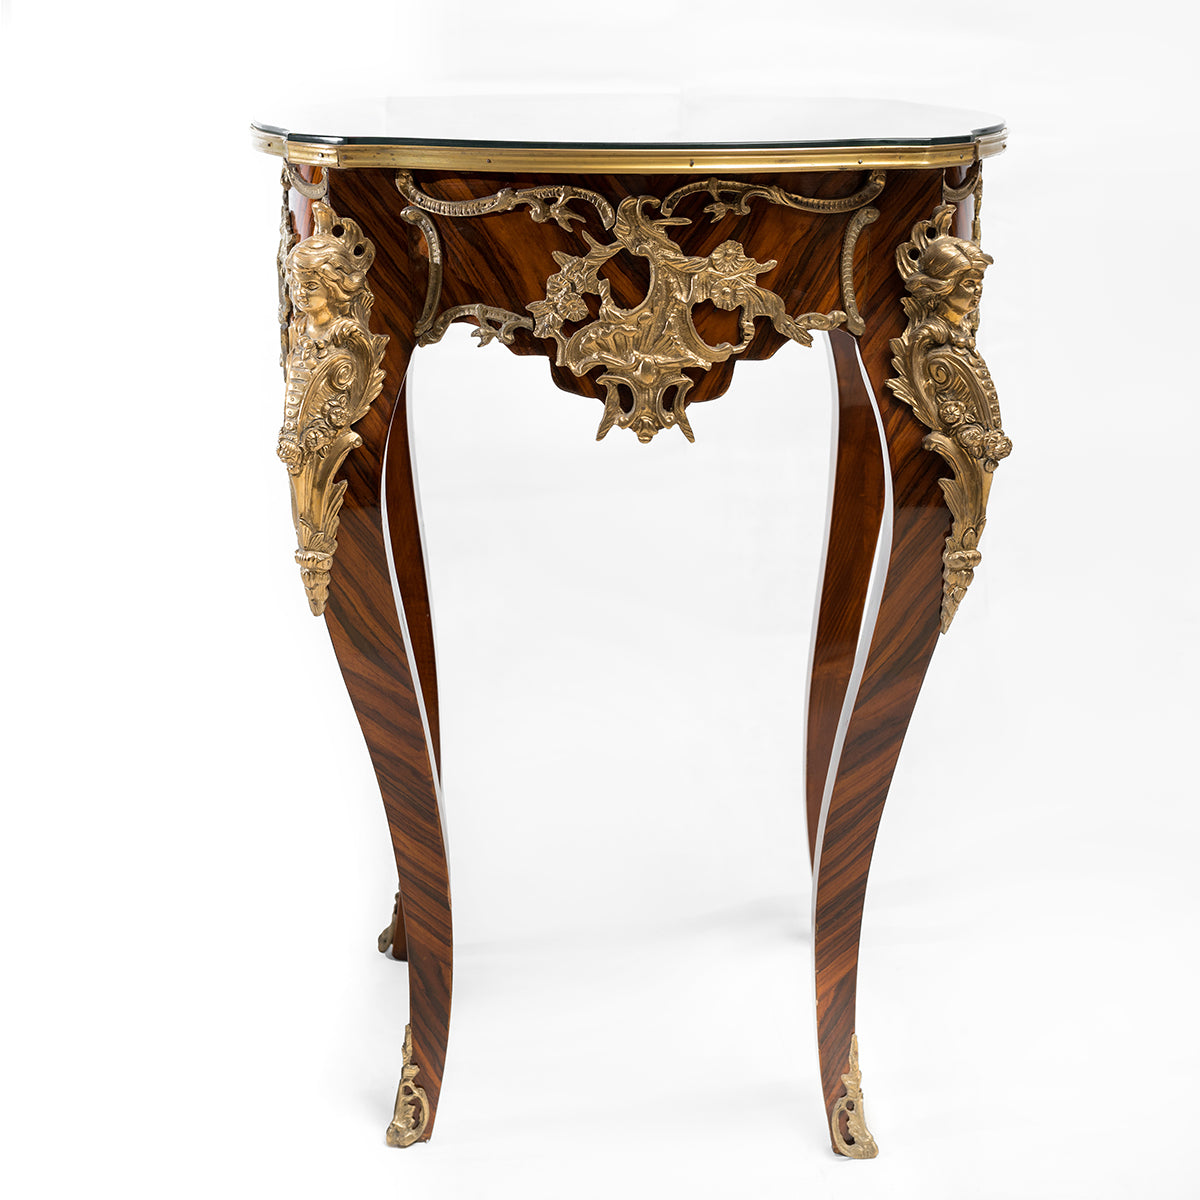 Louis XV style ormolu mounted and marquetry inlaid side table (2 set)